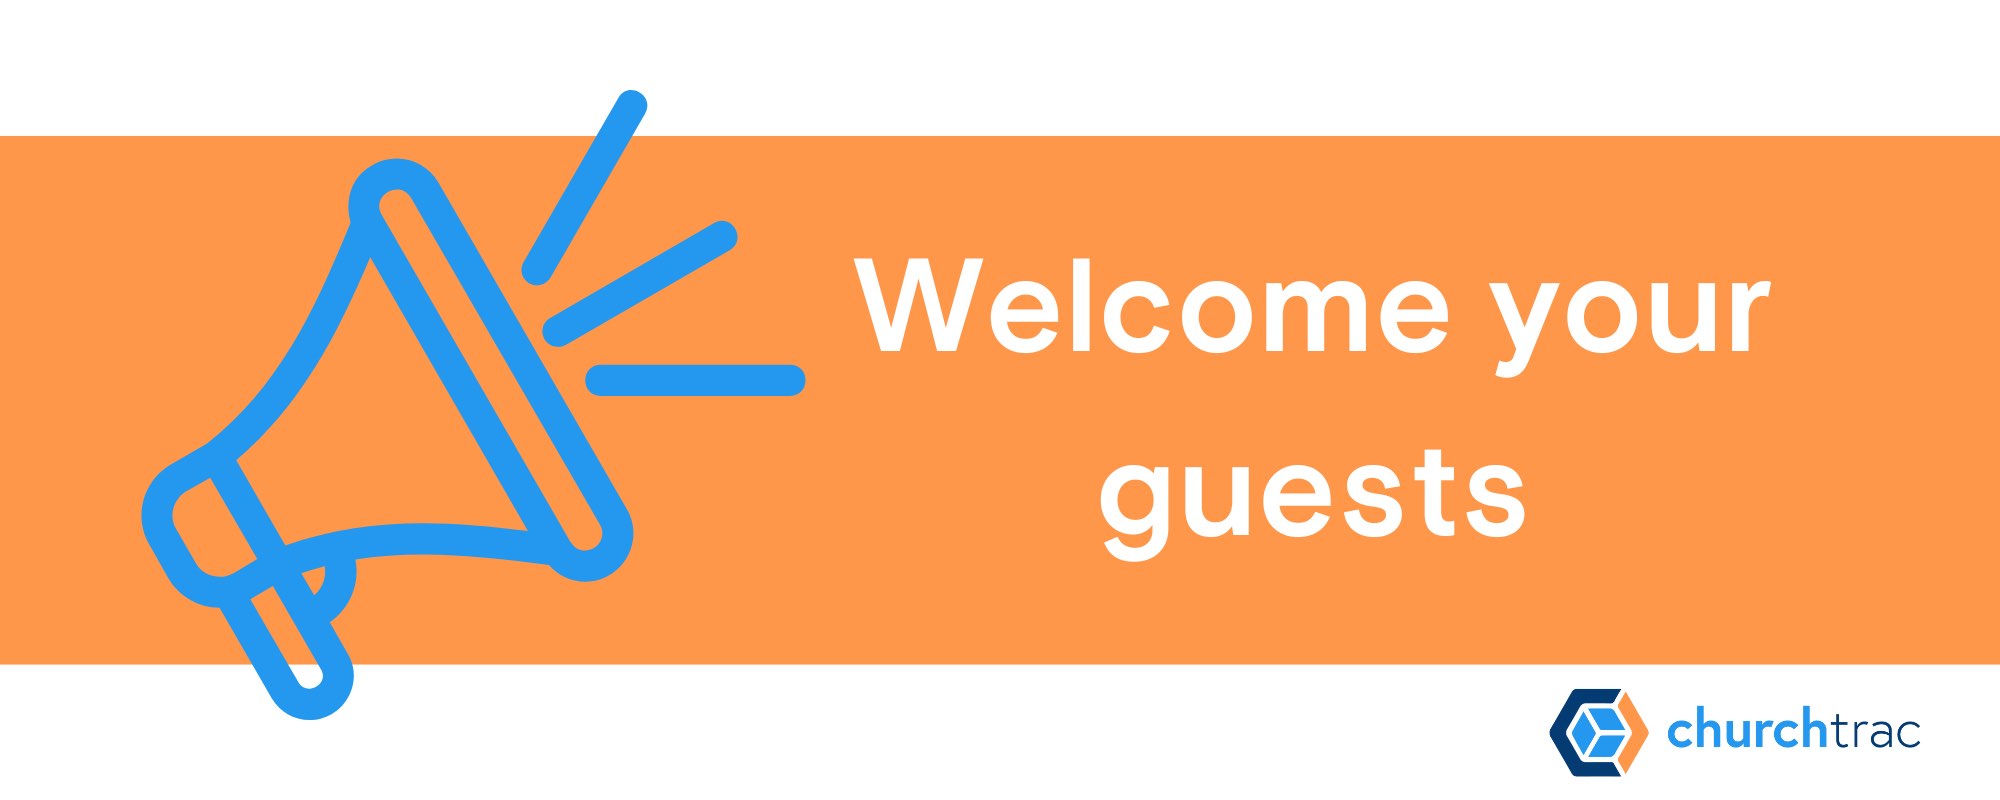 The home page of your website must welcome guests